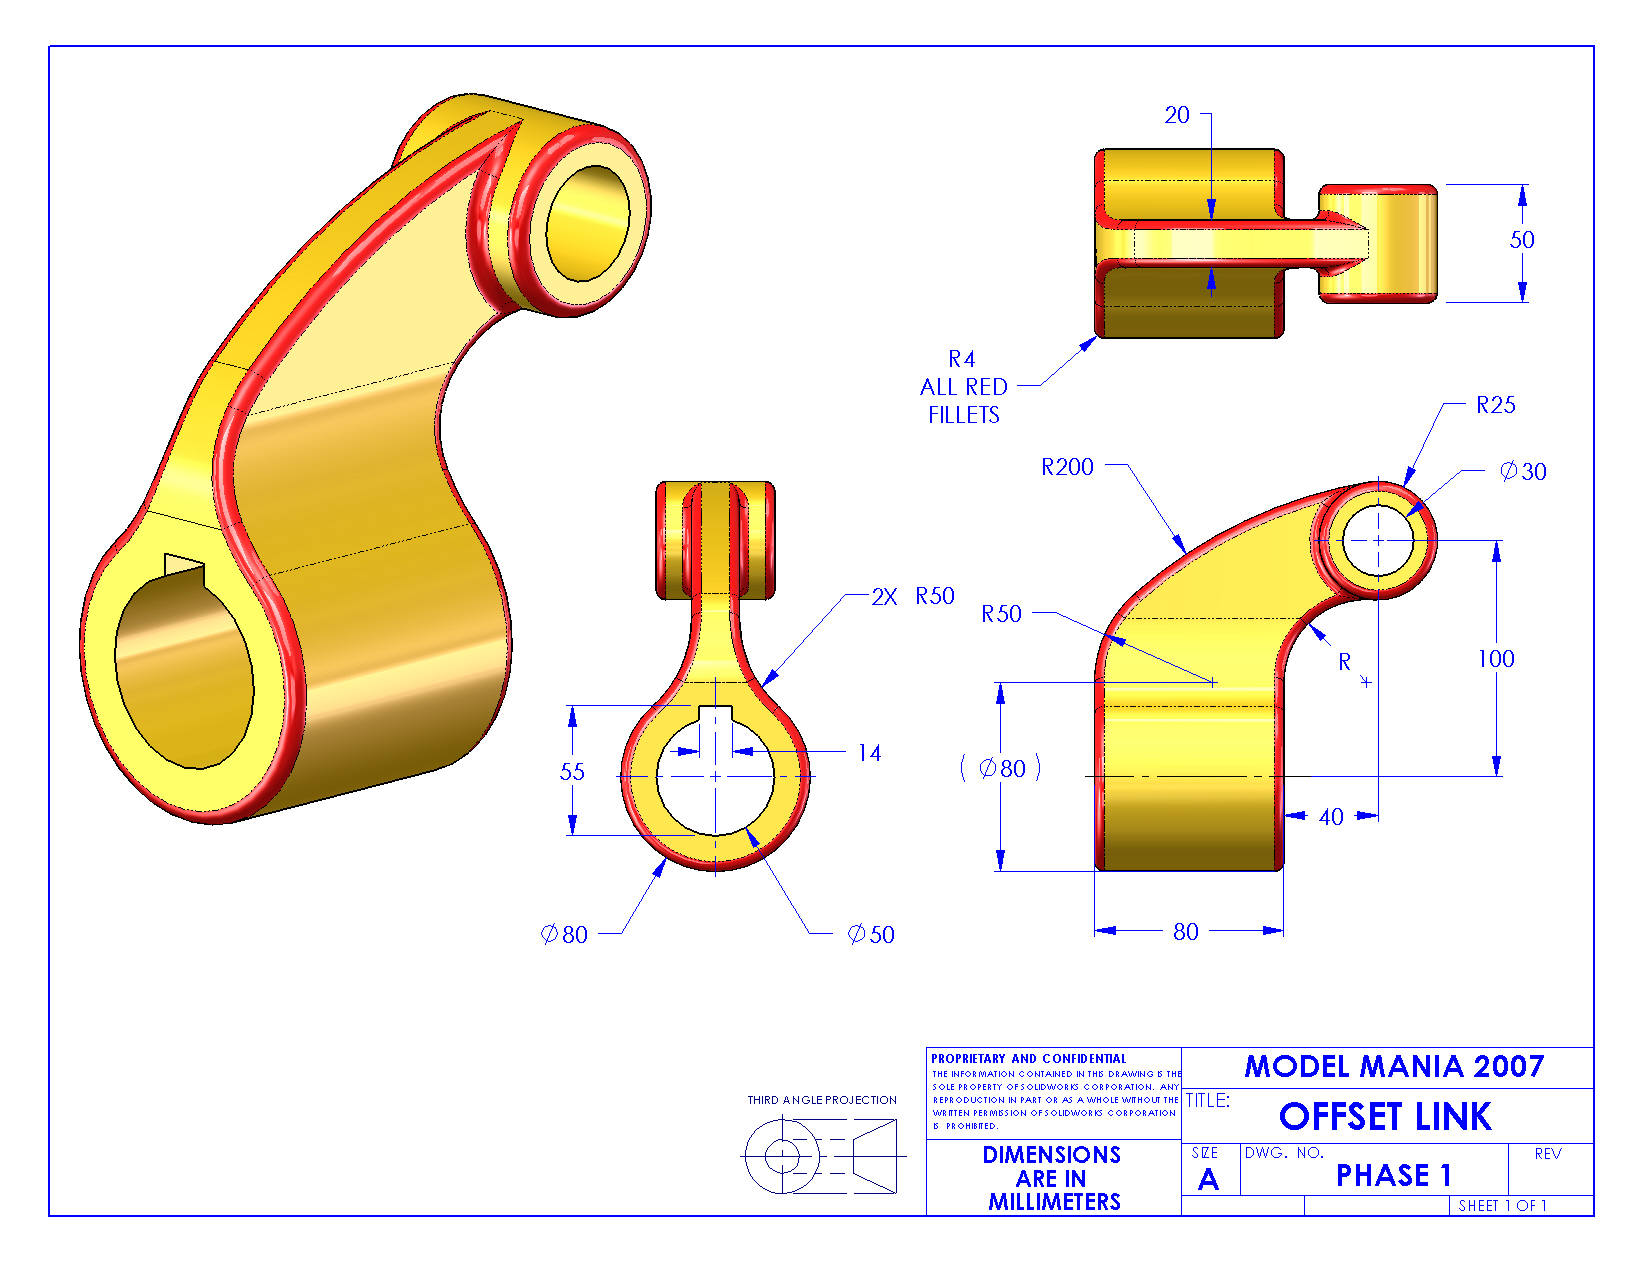 download linkedin solidworks: drawings